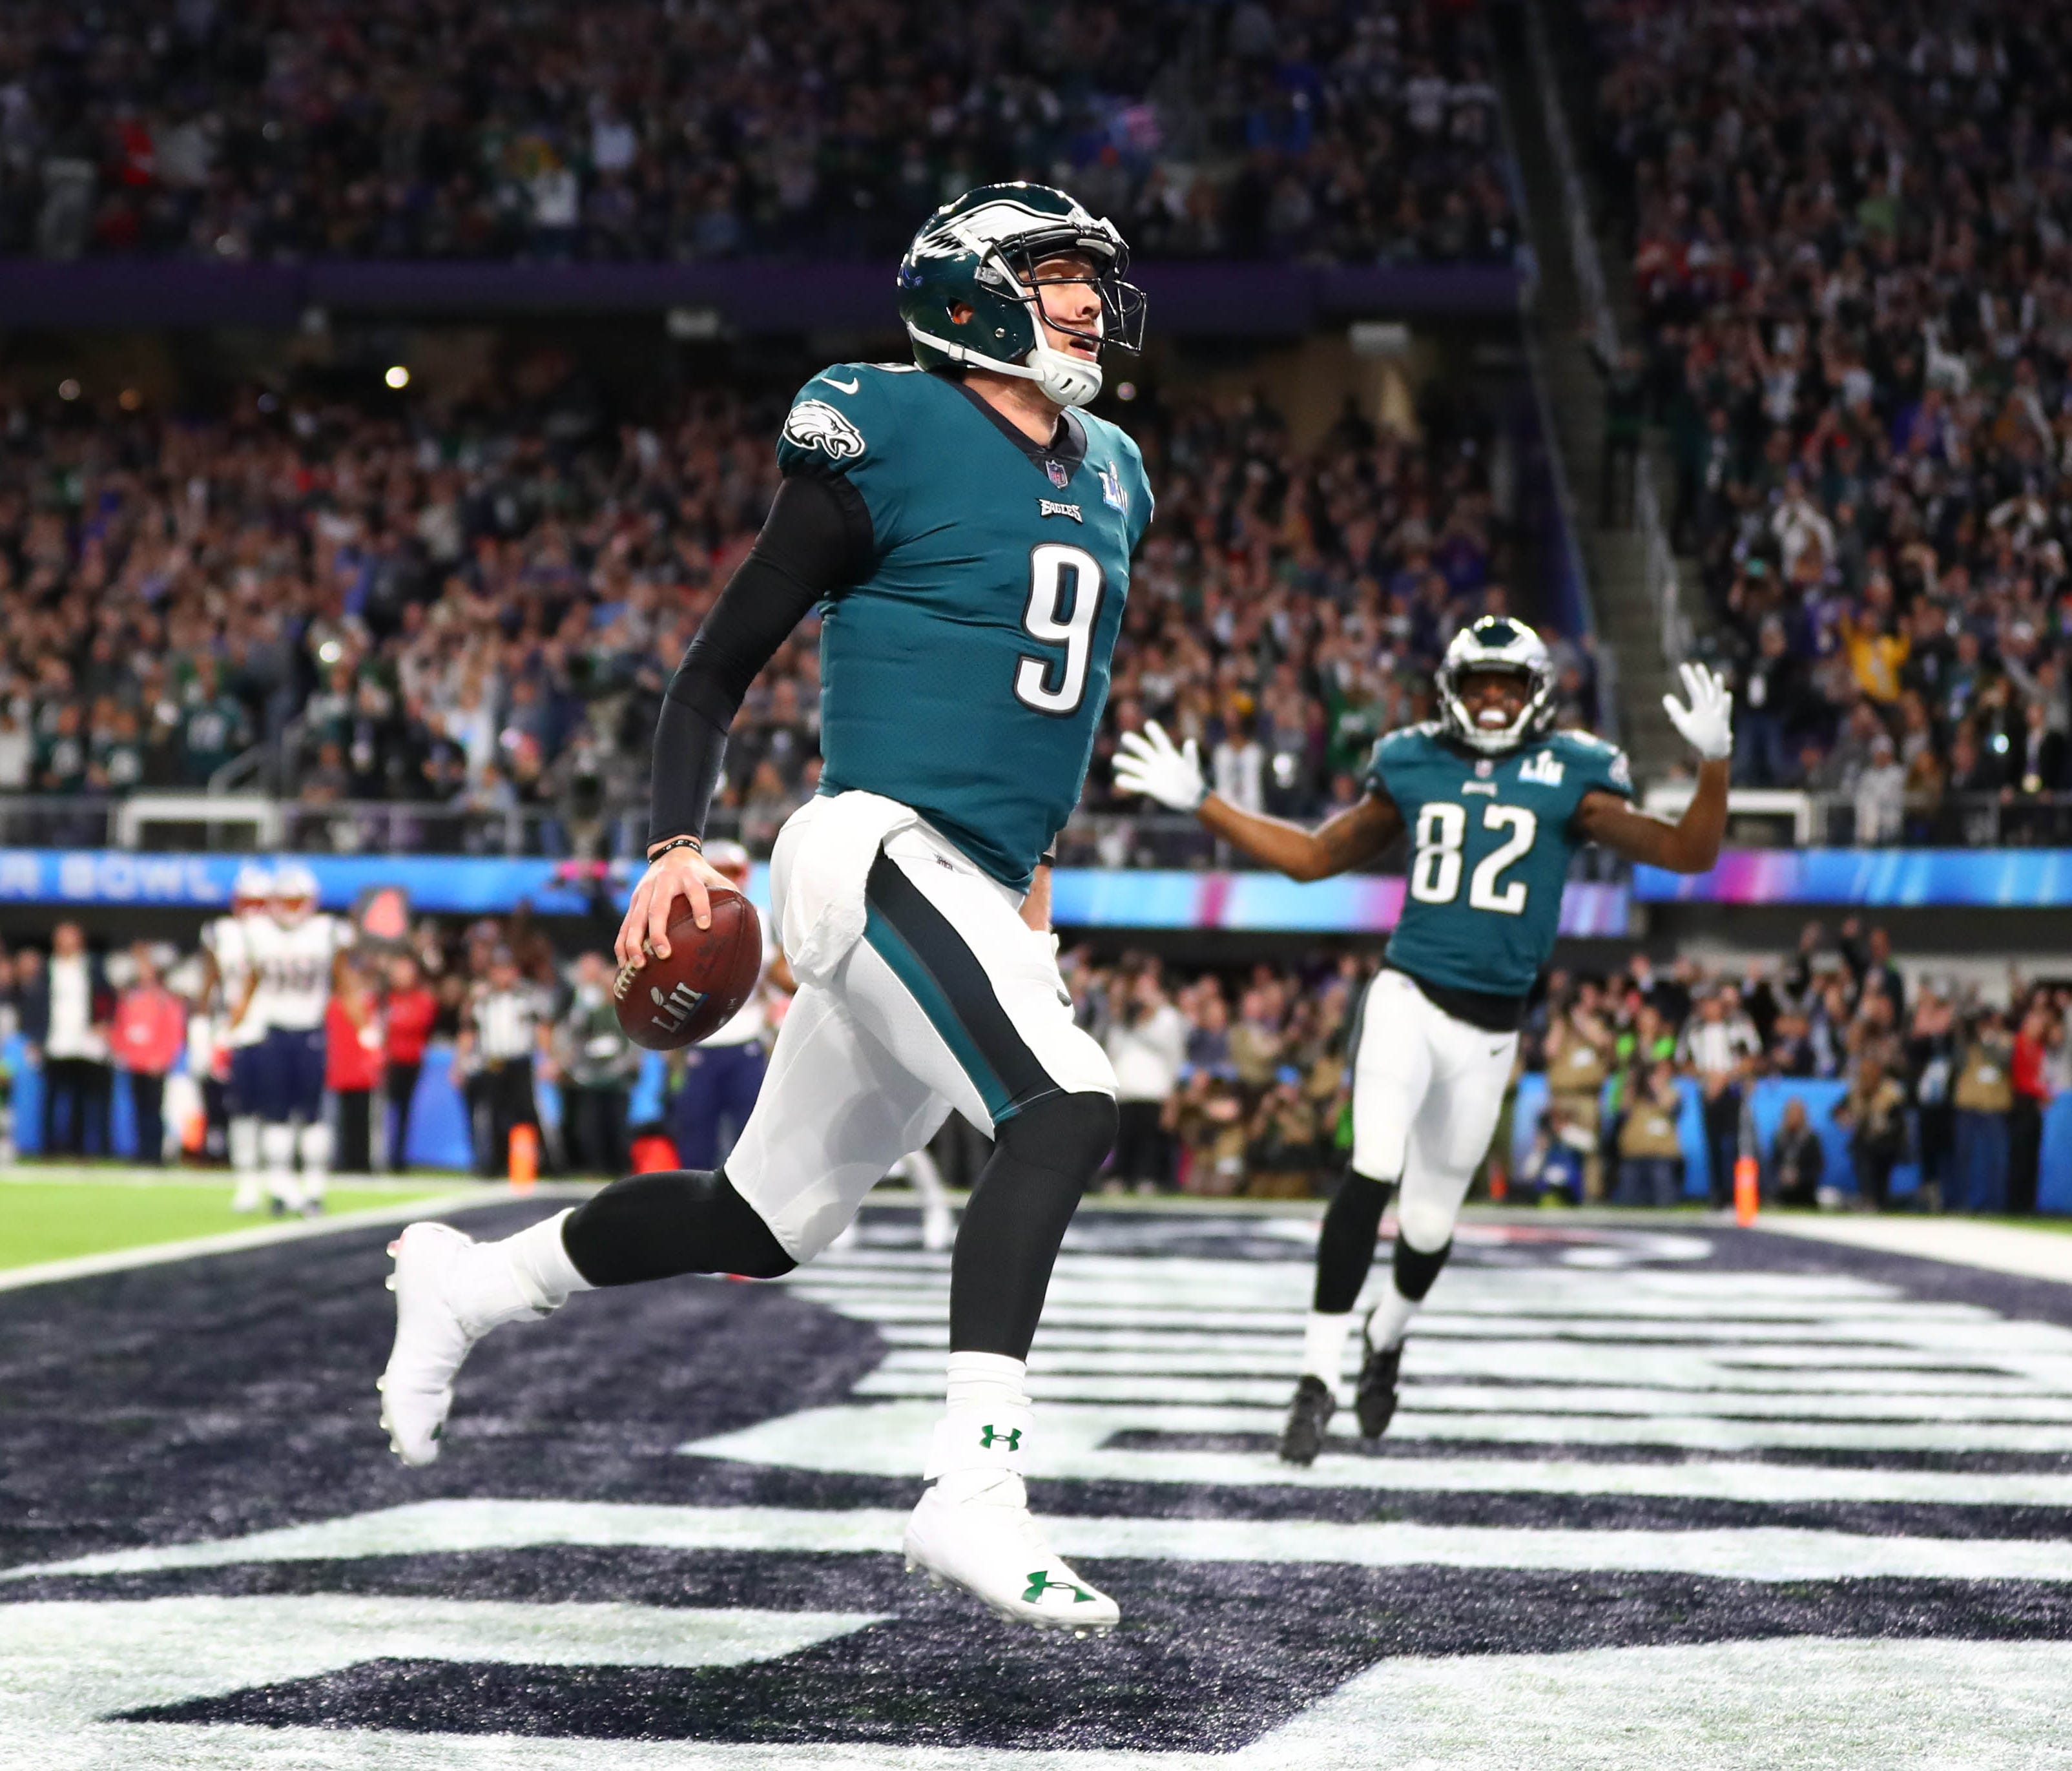 Philadelphia Eagles quarterback Nick Foles (9) catches a touchdown pass against the New England Patriots in the second quarter in Super Bowl LII at U.S. Bank Stadium.